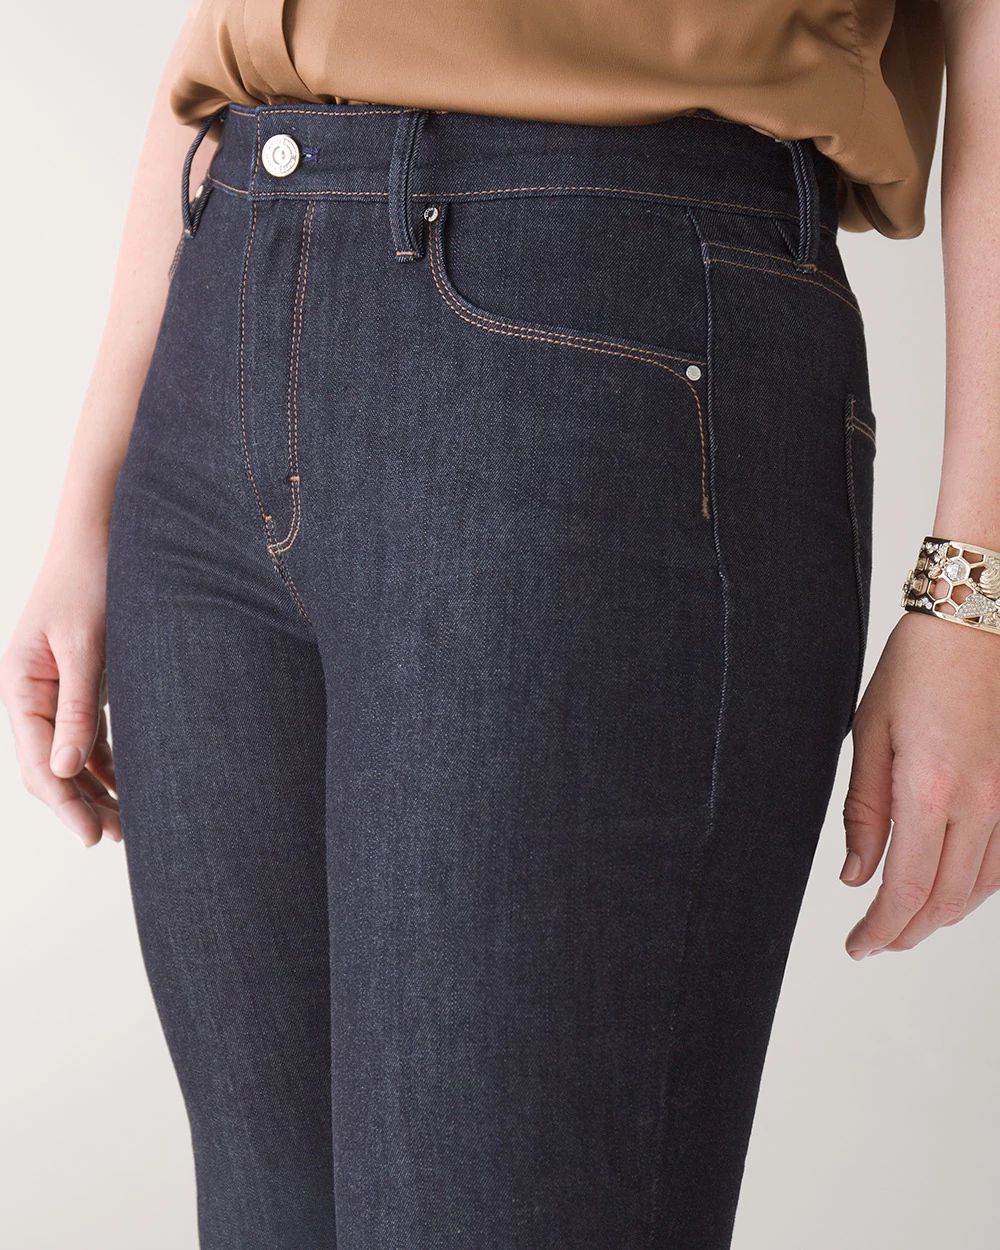 Curvy-Fit High-Rise Skinny Flare Sculpt Jeans click to view larger image.